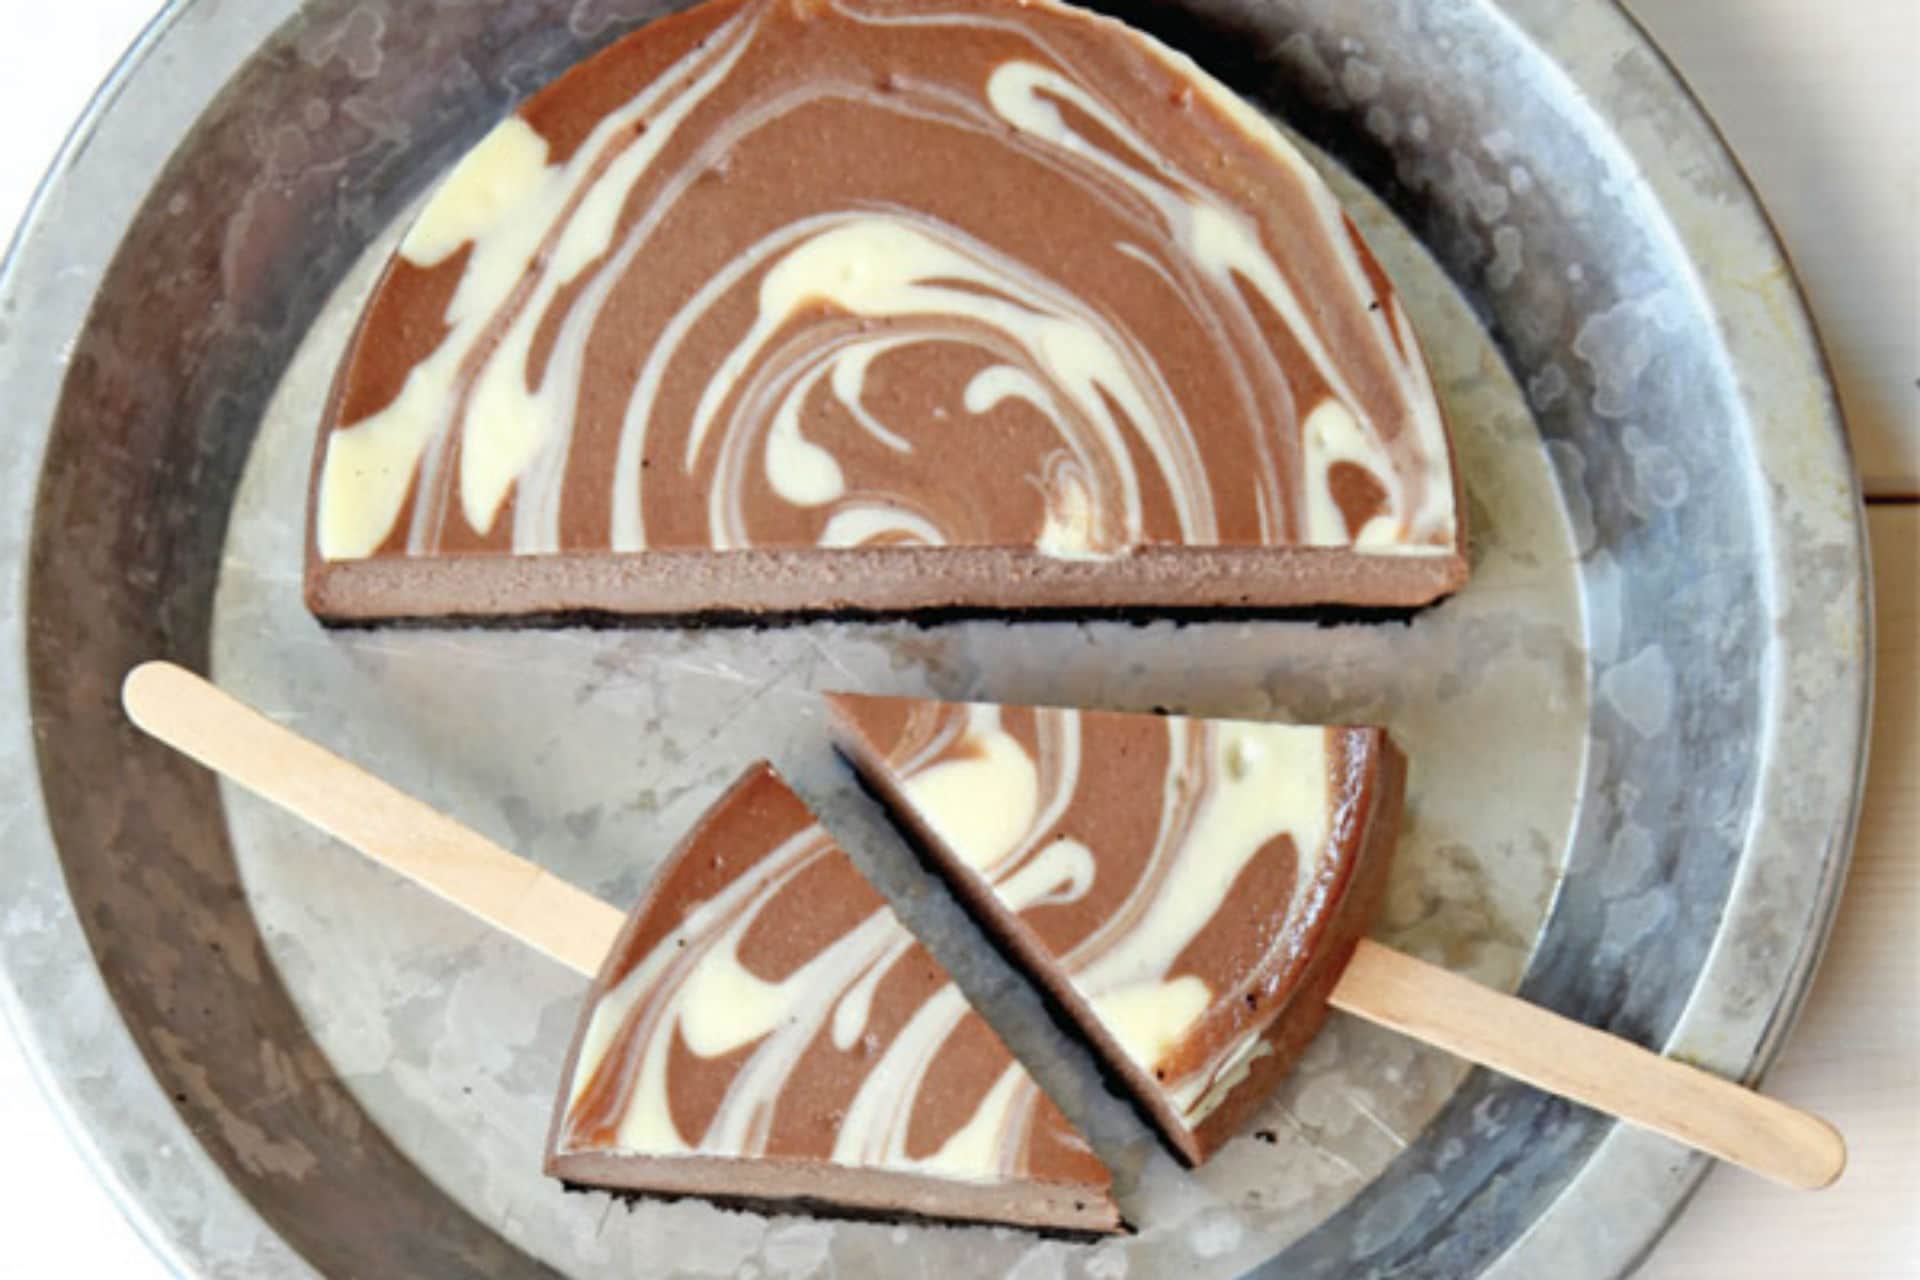 cheesecake slices with popsicle stick through it